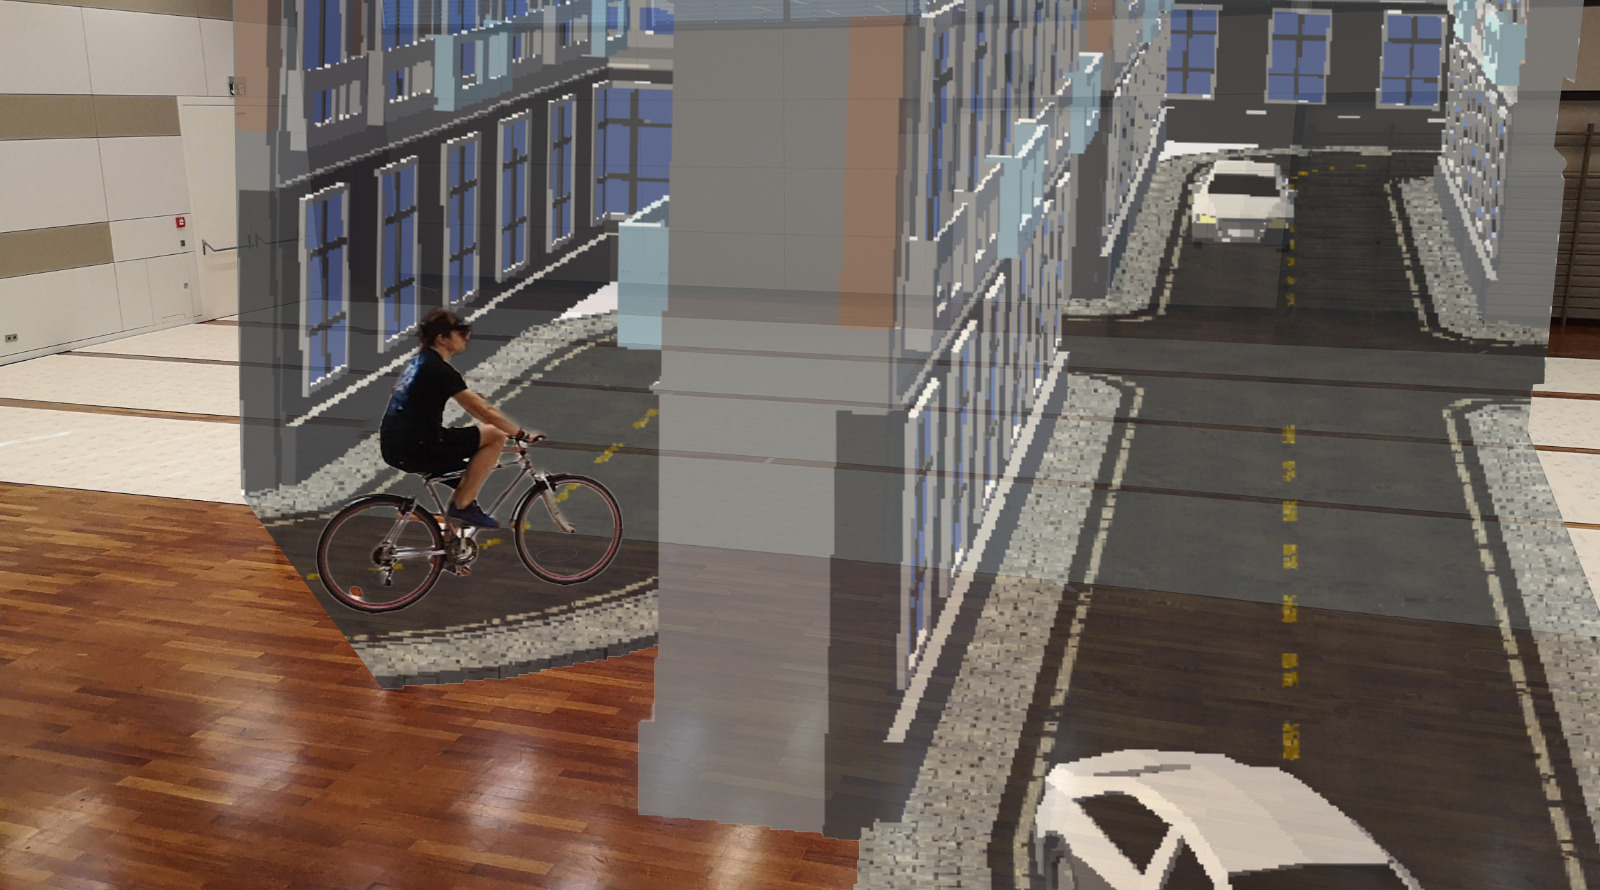 BikeAR: Understanding Cyclists’ Crossing Decision-Making at Uncontrolled Intersections using Augmented Reality